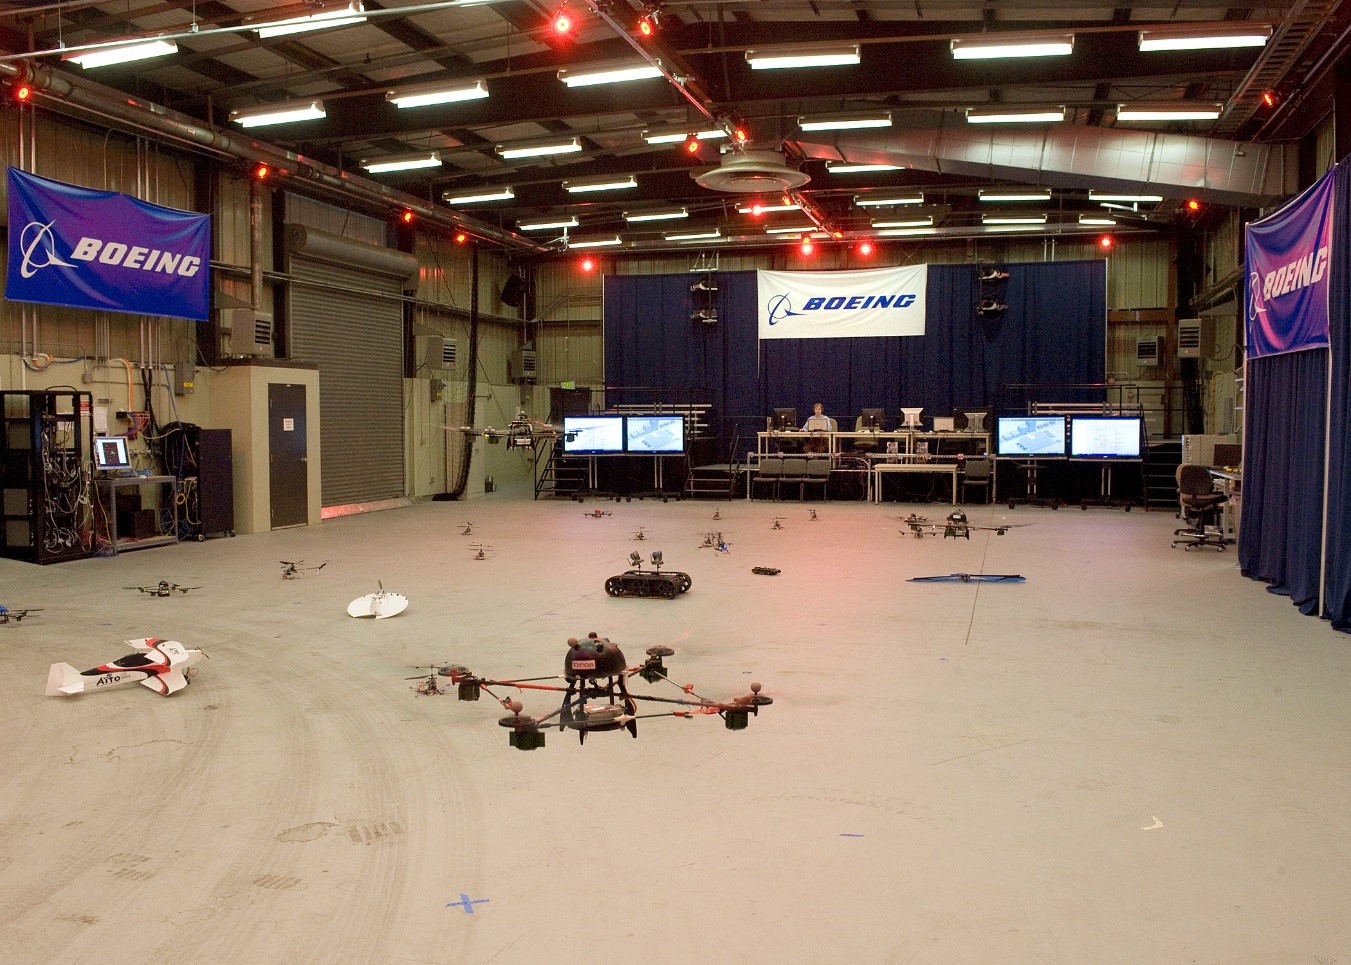 Fig. 3: The test facility at Boeing in Seattle. The red lights in the ceiling indicate where the cameras used by the external vision system are located.